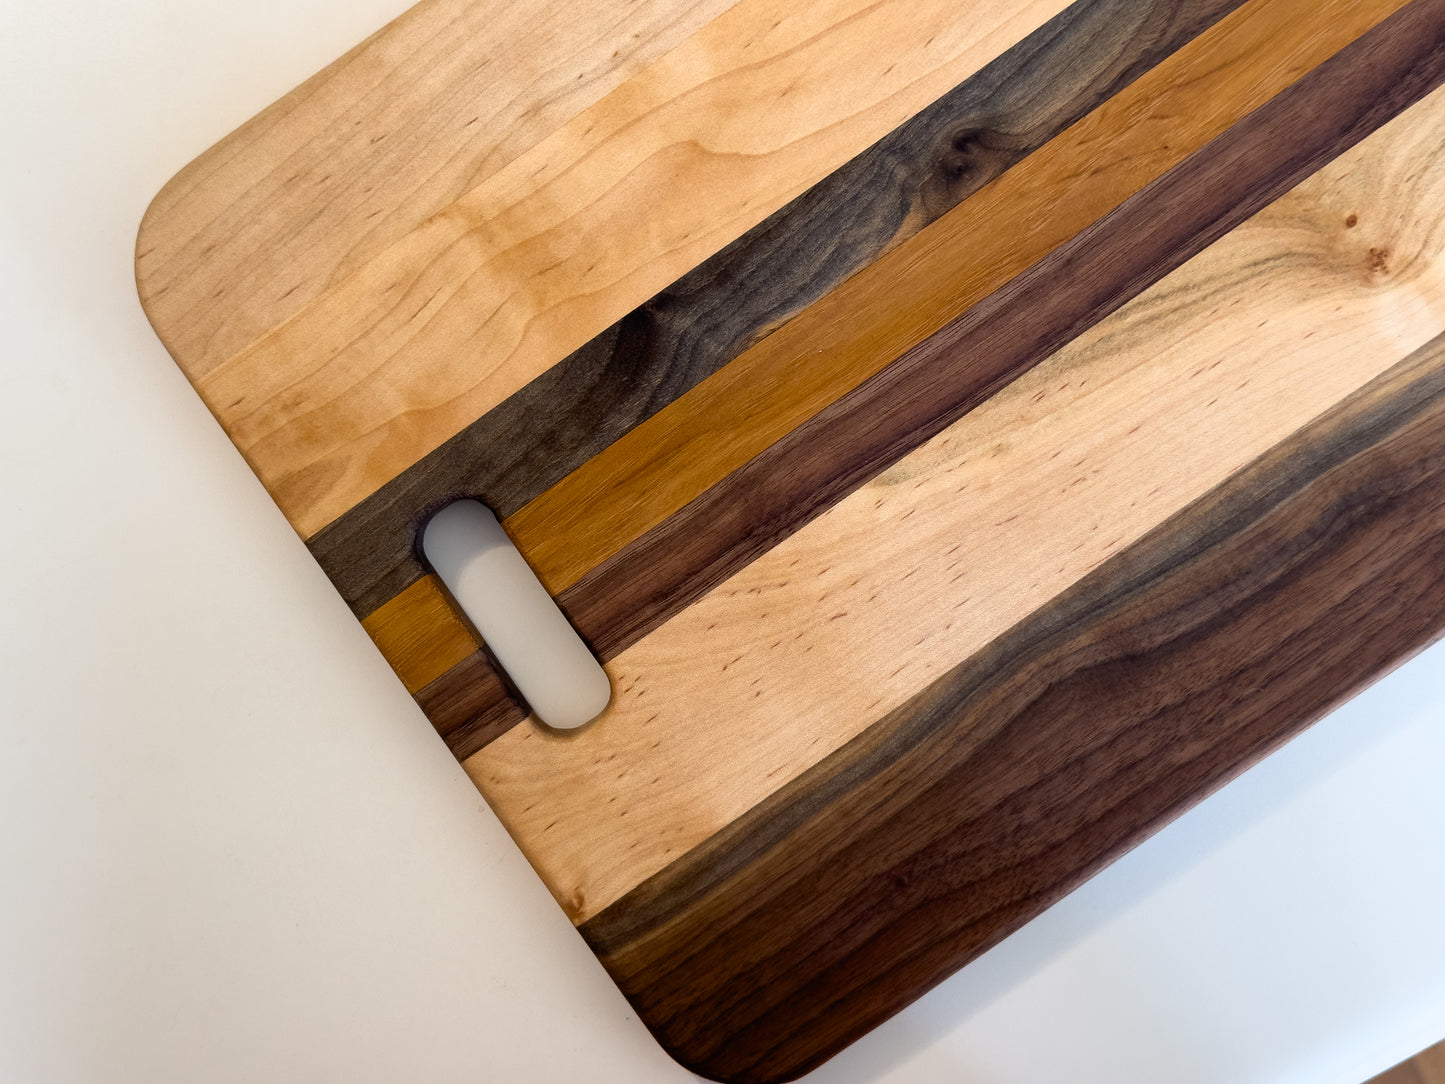 Solid Wood Charcuterie Board | Wood Cutting Board With Handle